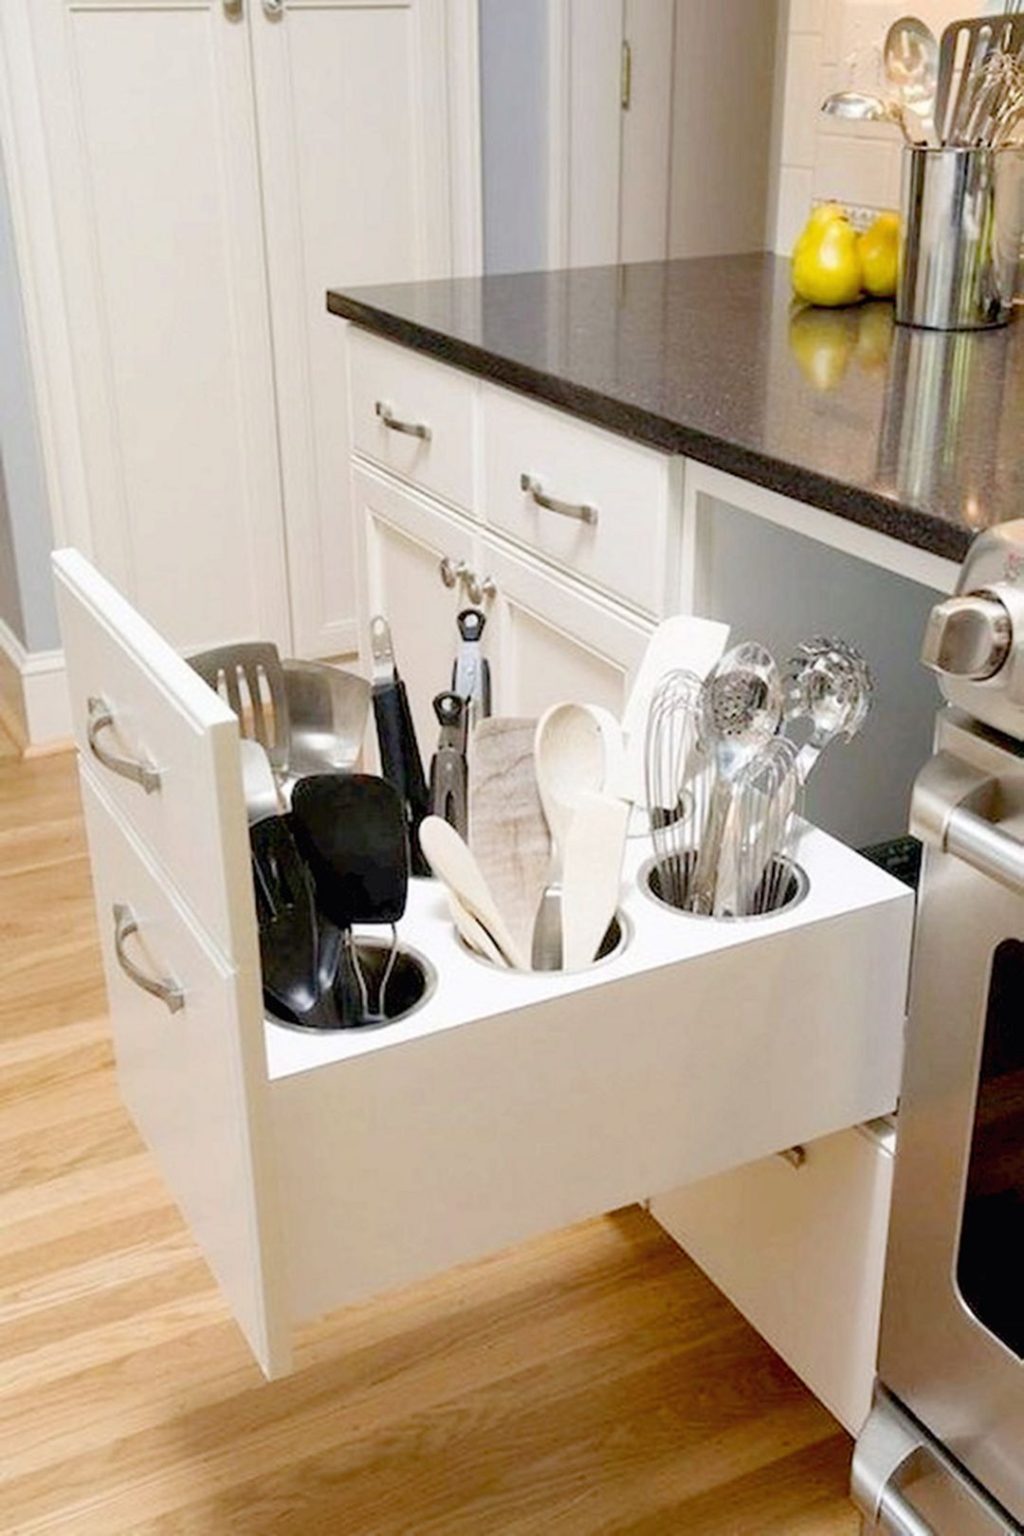 Keep Neat With Kitchen Hidden Storage solutions for wheelchair